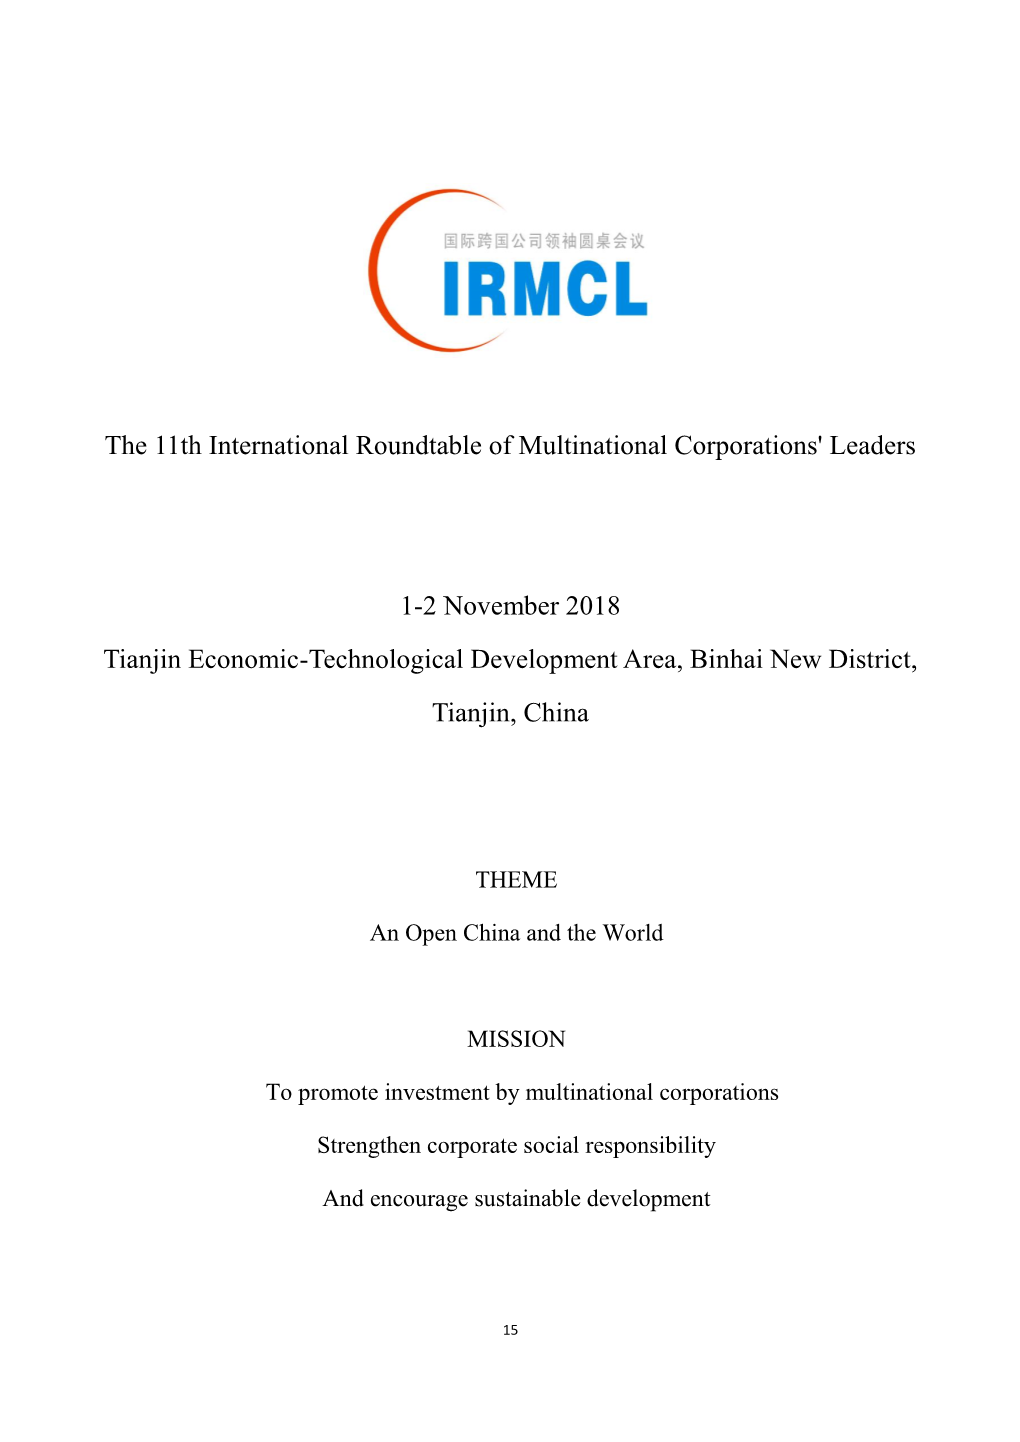 The 11Th International Roundtable of Multinational Corporations' Leaders 1-2 November 2018 Tianjin Economic-Technological Develo